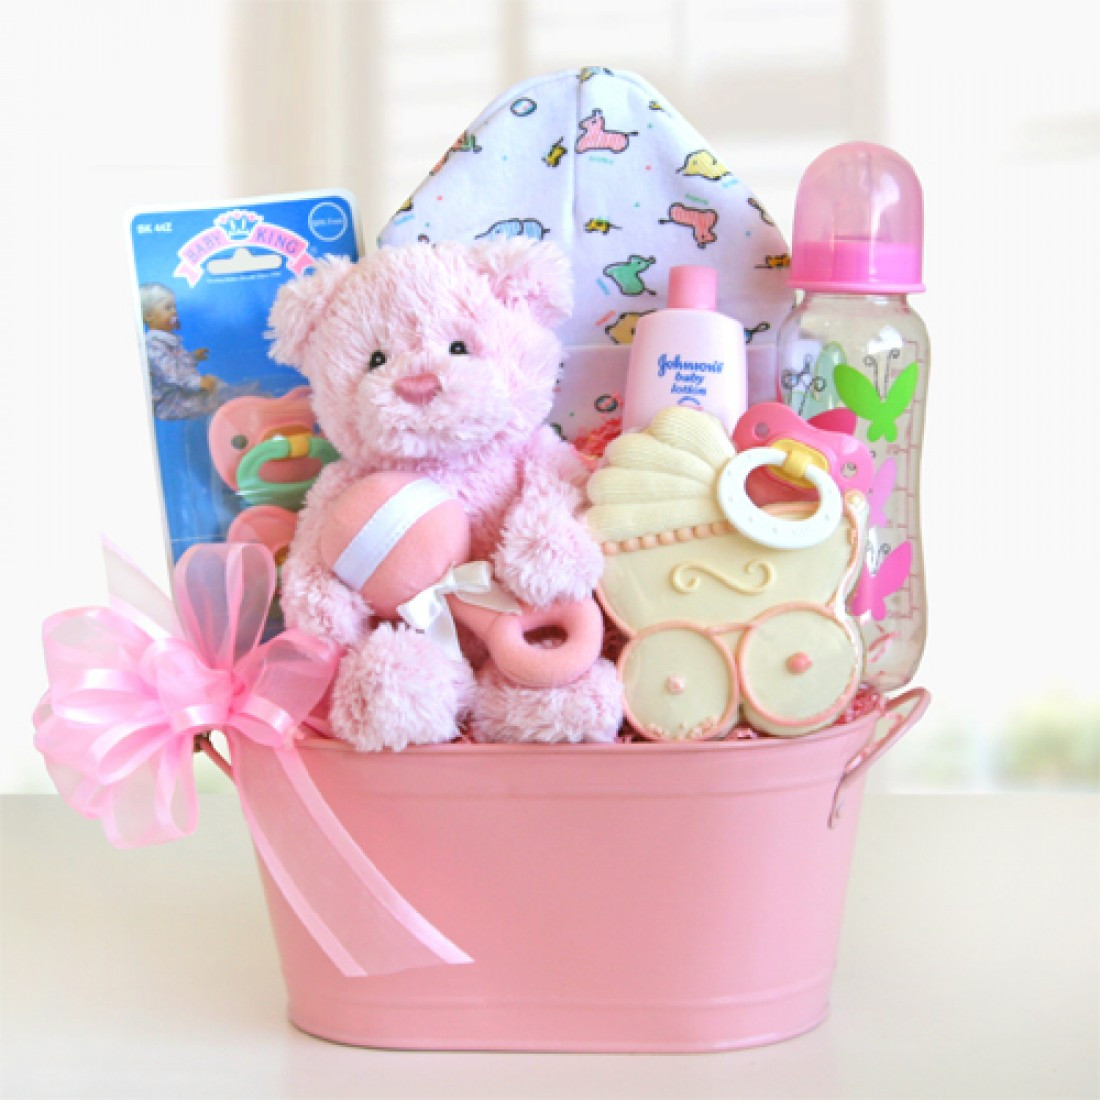 Gift Basket Baby
 Cute Package New Baby Gift Baskets